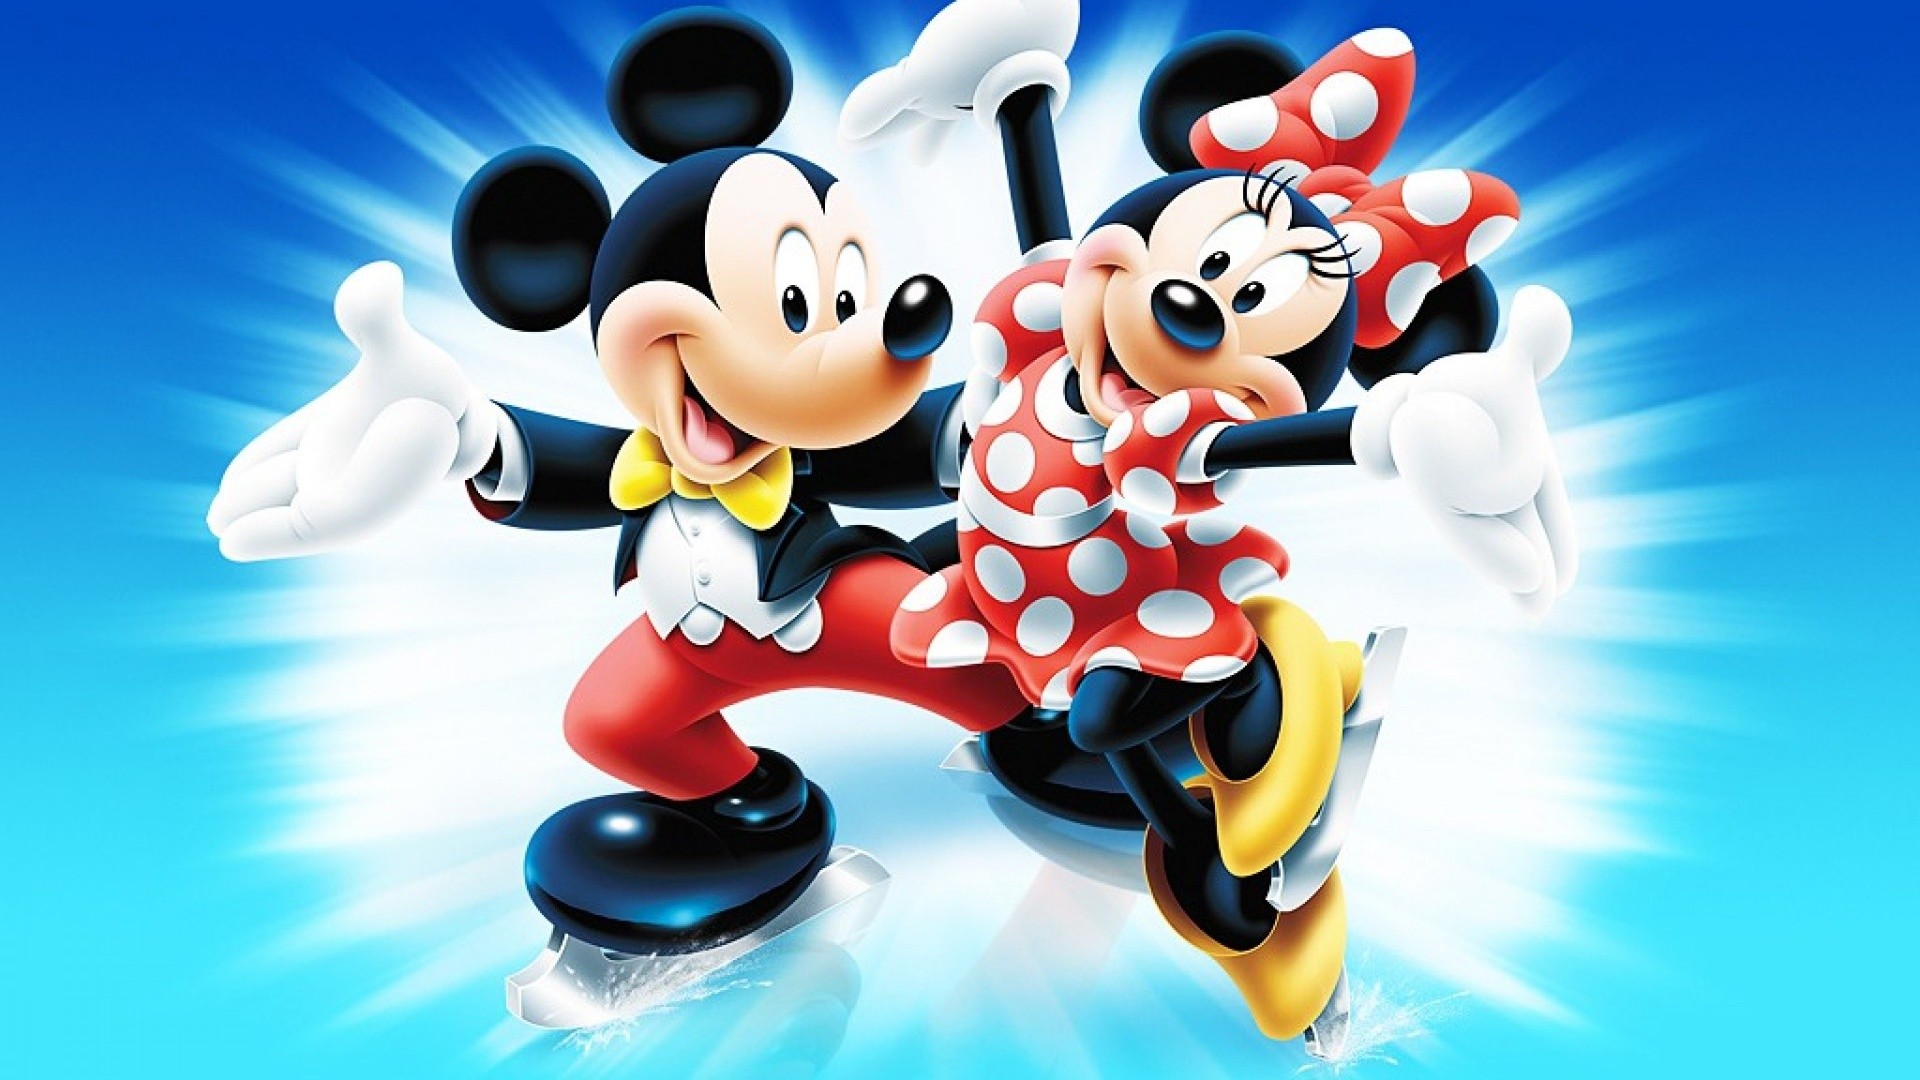 mickey and minnie mouse wallpapers free,animated cartoon,cartoon,animation,illustration,fun